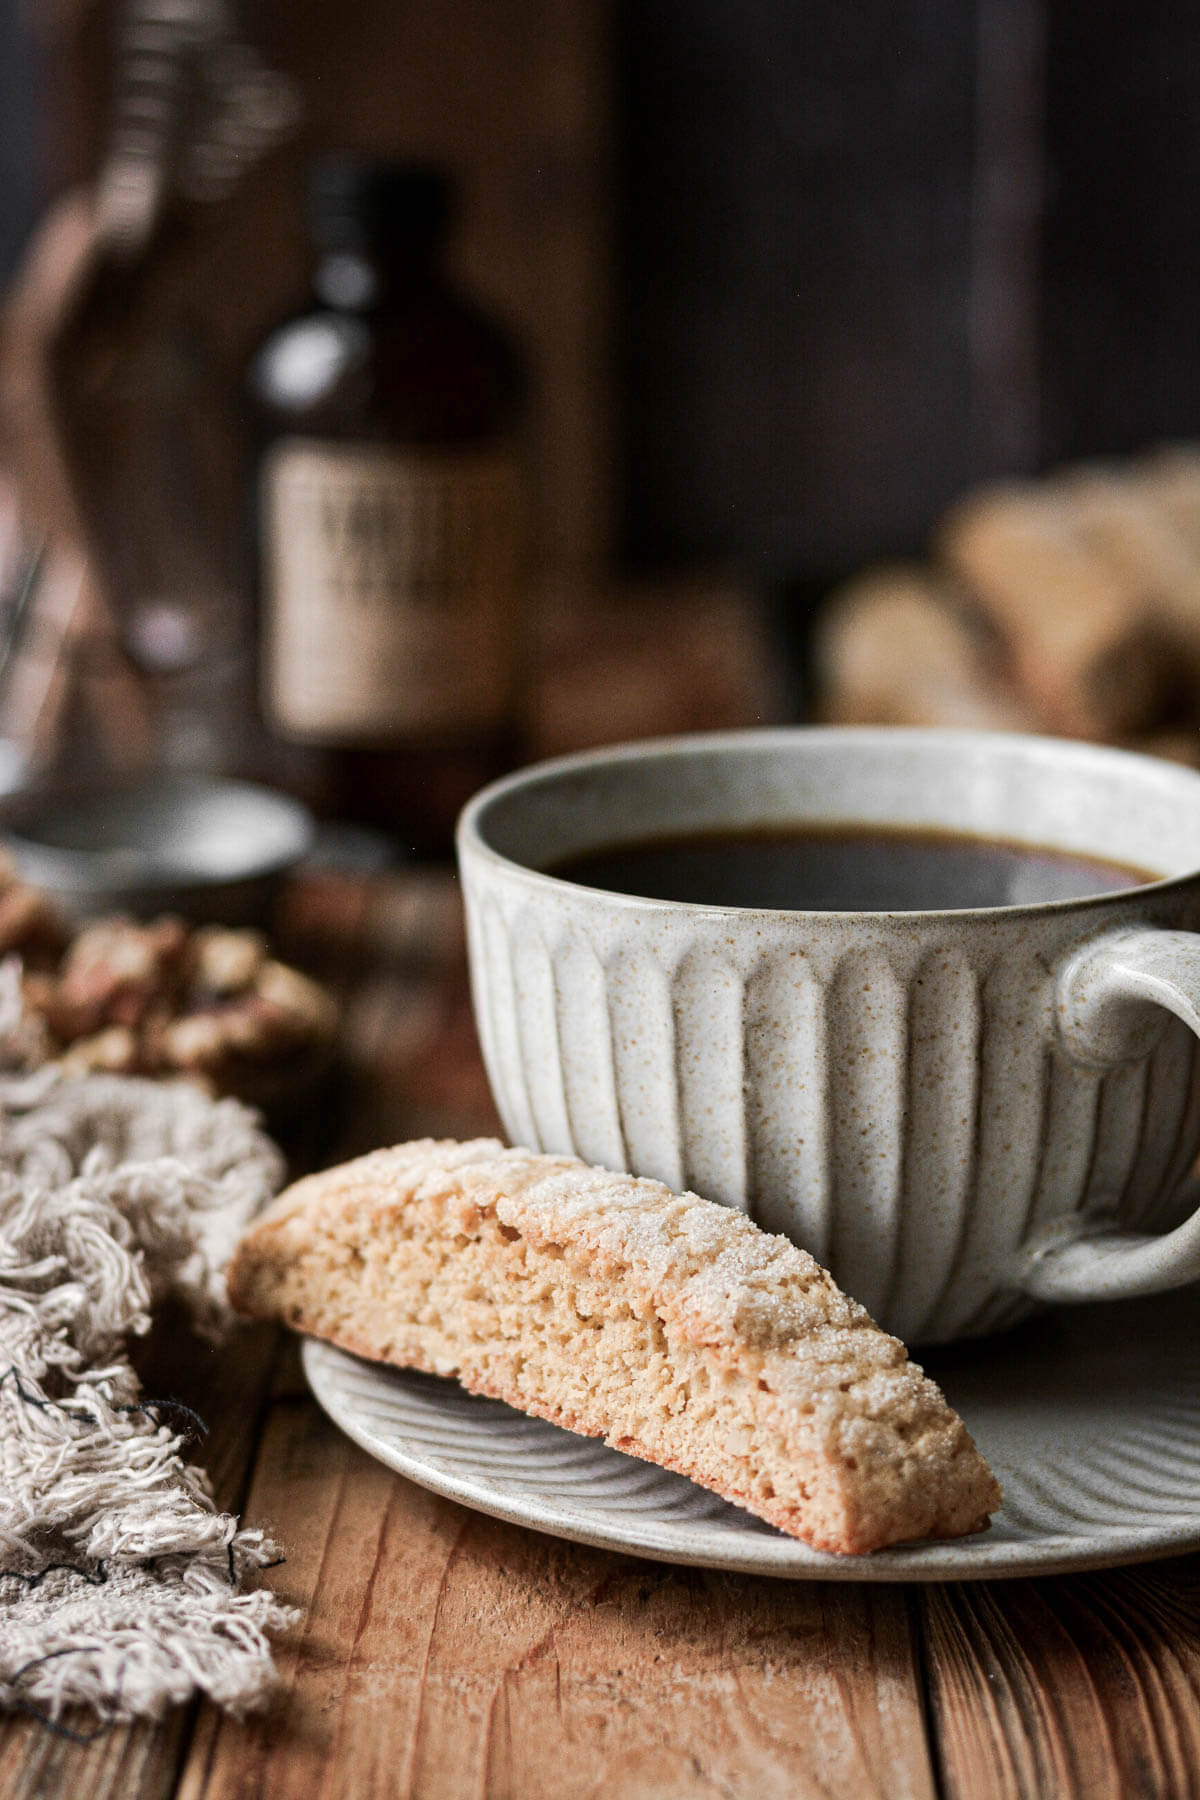 Ginger walnut biscotti resting next to a cup of coffee.